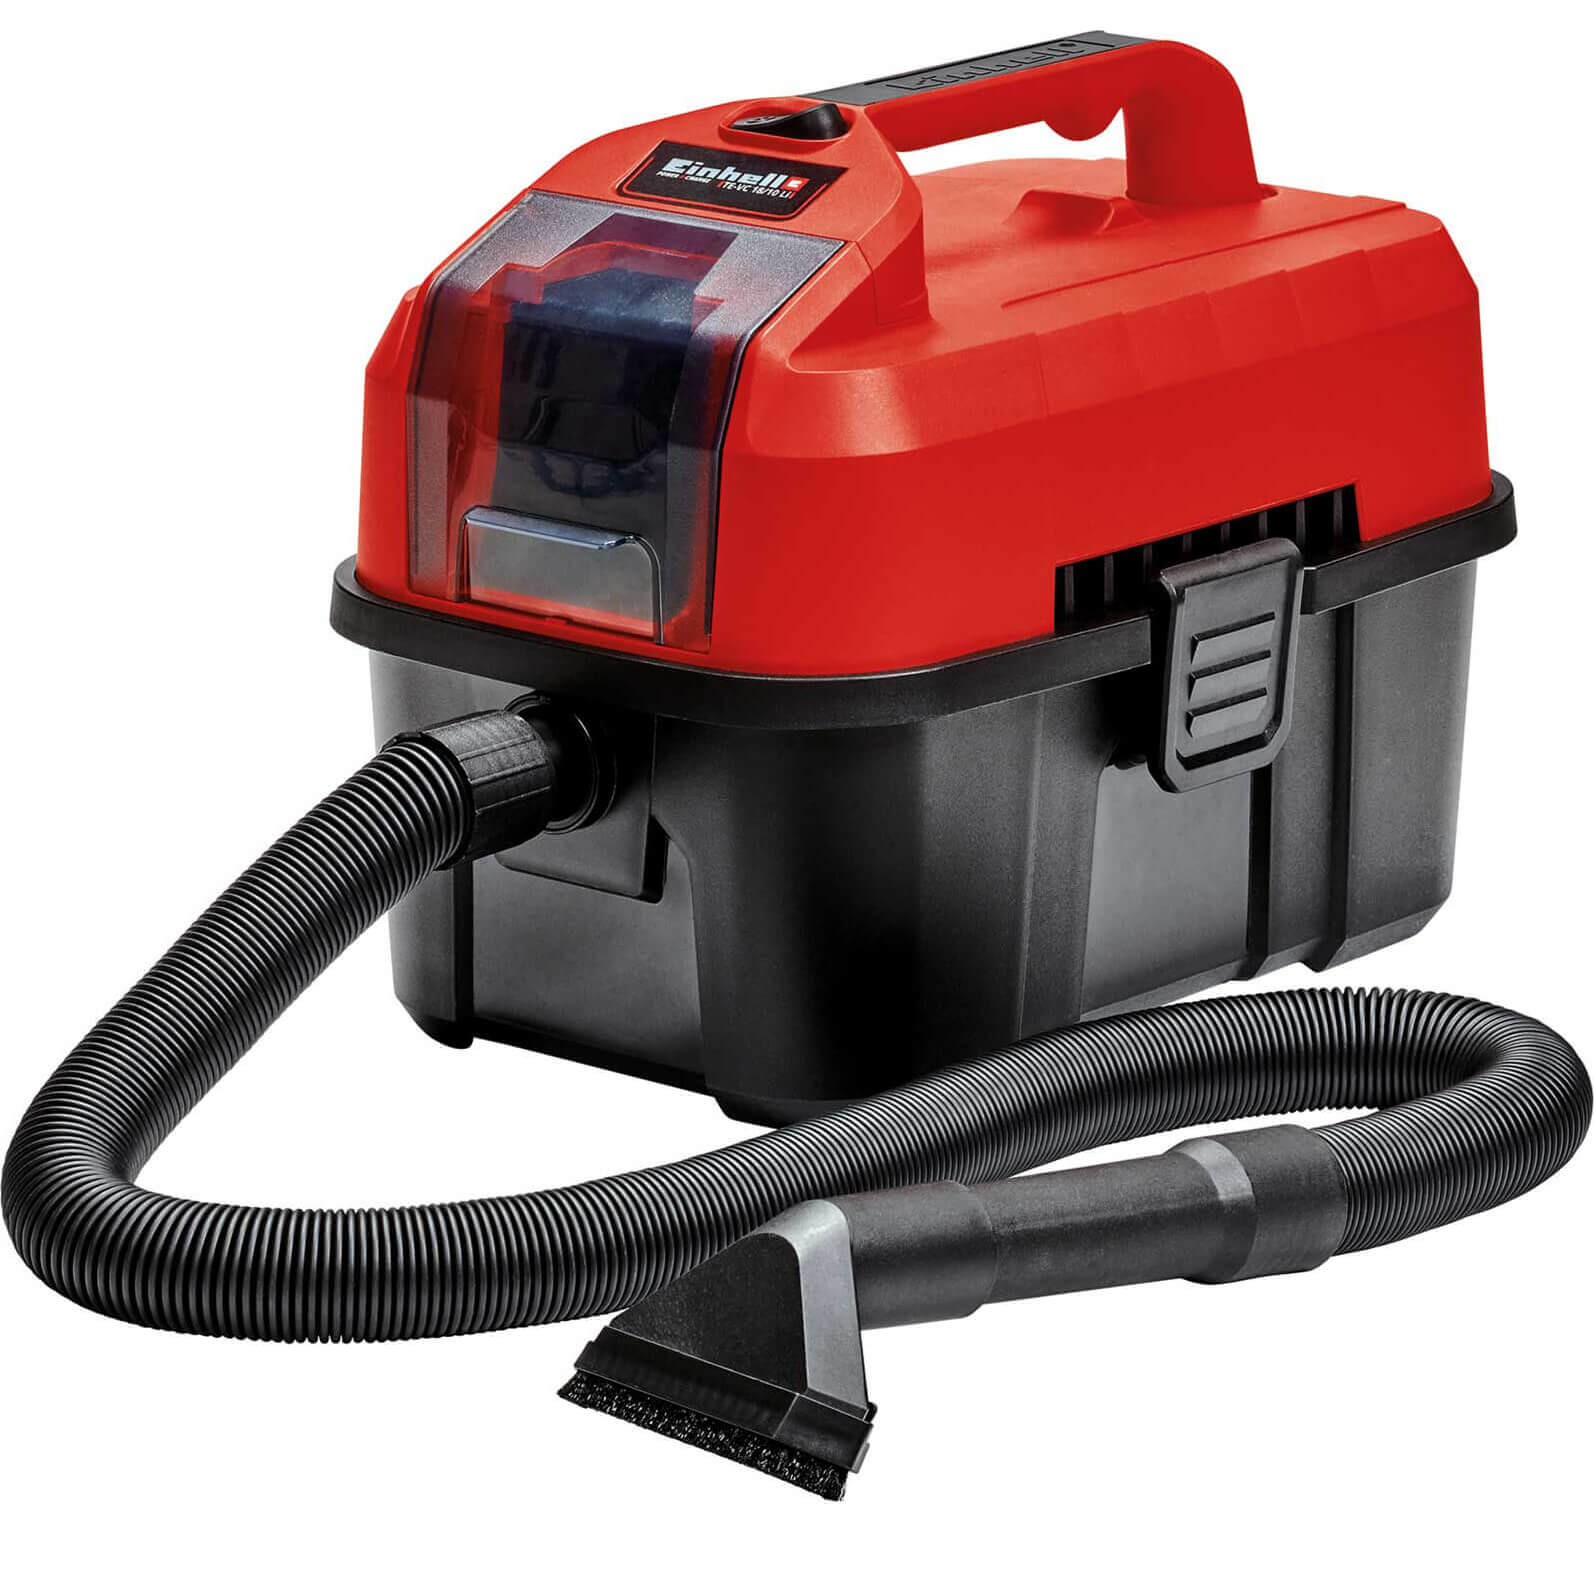 Image of Einhell TE-VC 18/10 Li 18v Cordless Mini Wet and Dry Vacuum Cleaner 10L No Batteries No Charger No Case